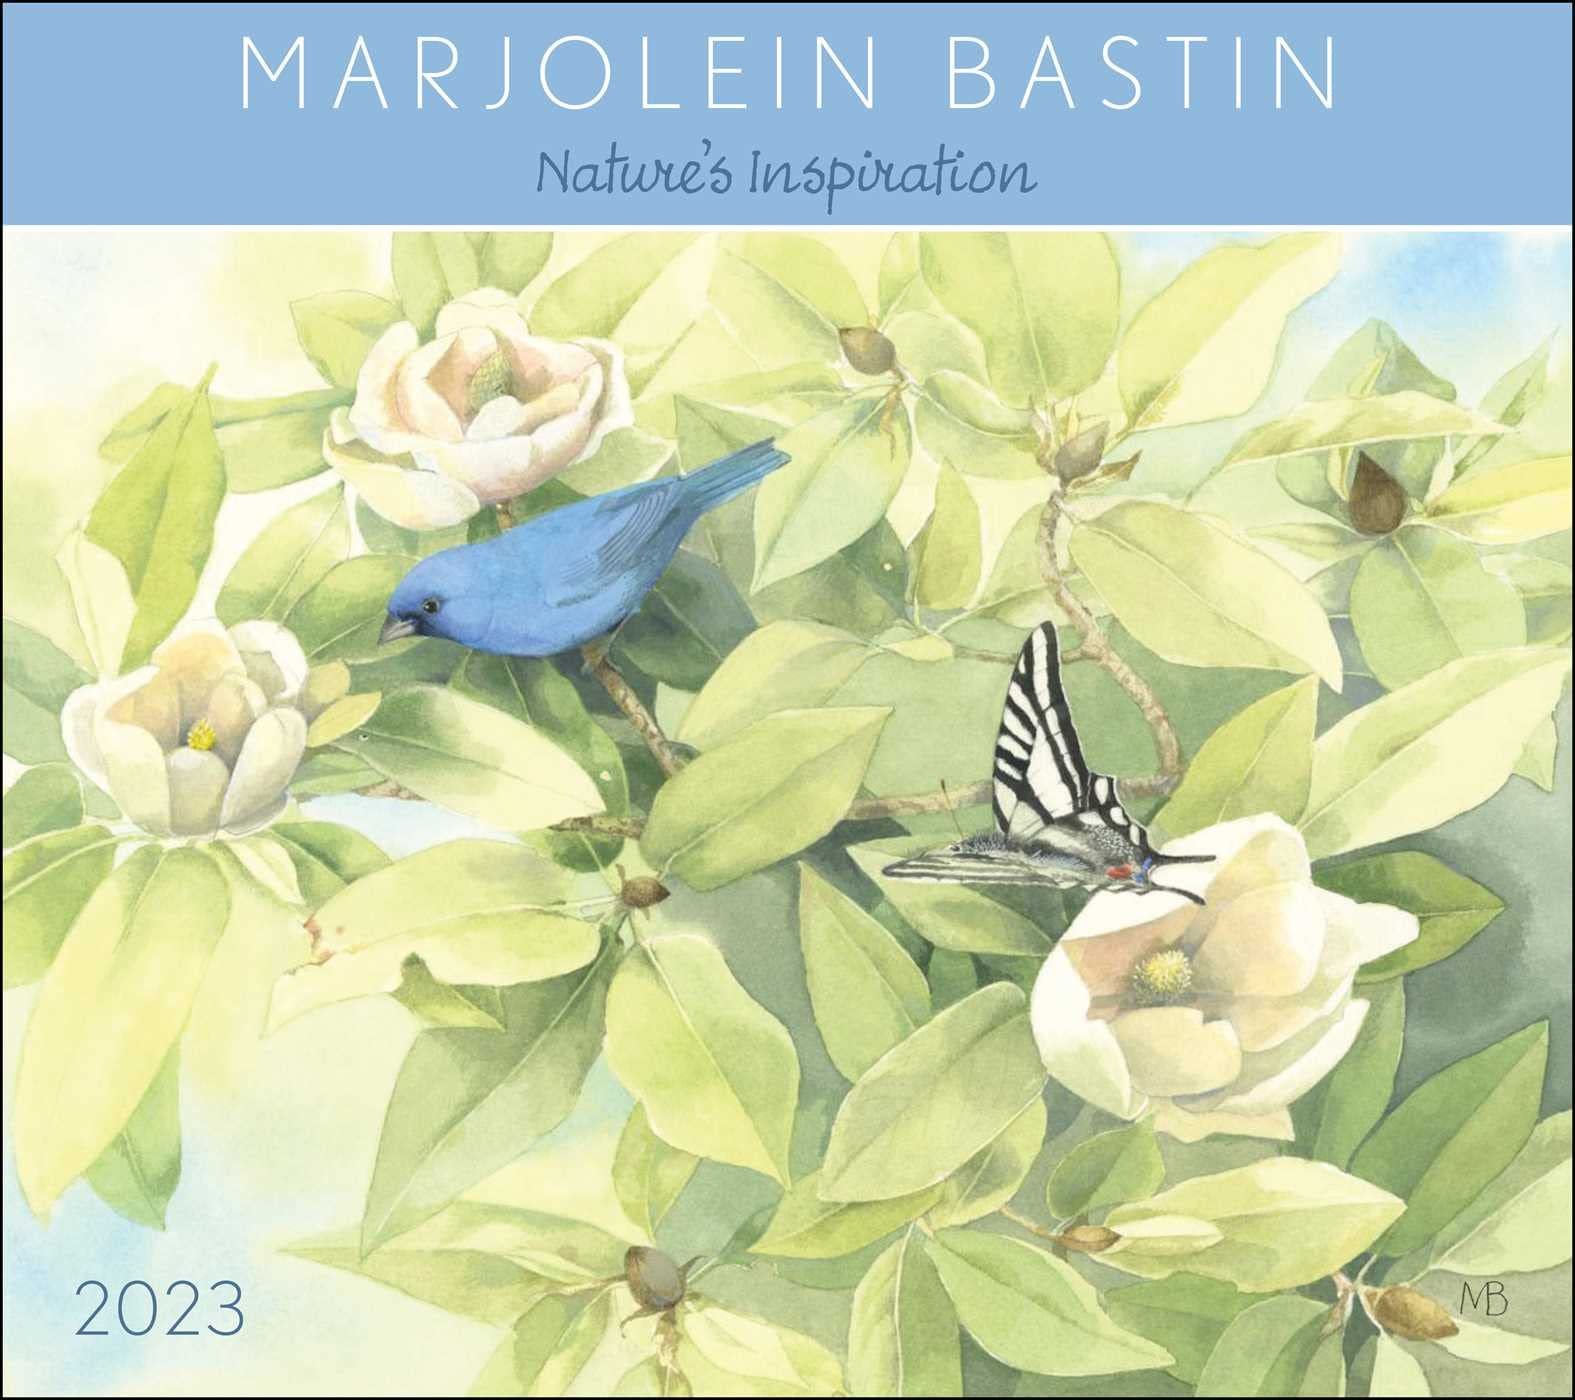 Marjolein Bastin Natures Inspiration 2023 Deluxe Wall Calendar with Print